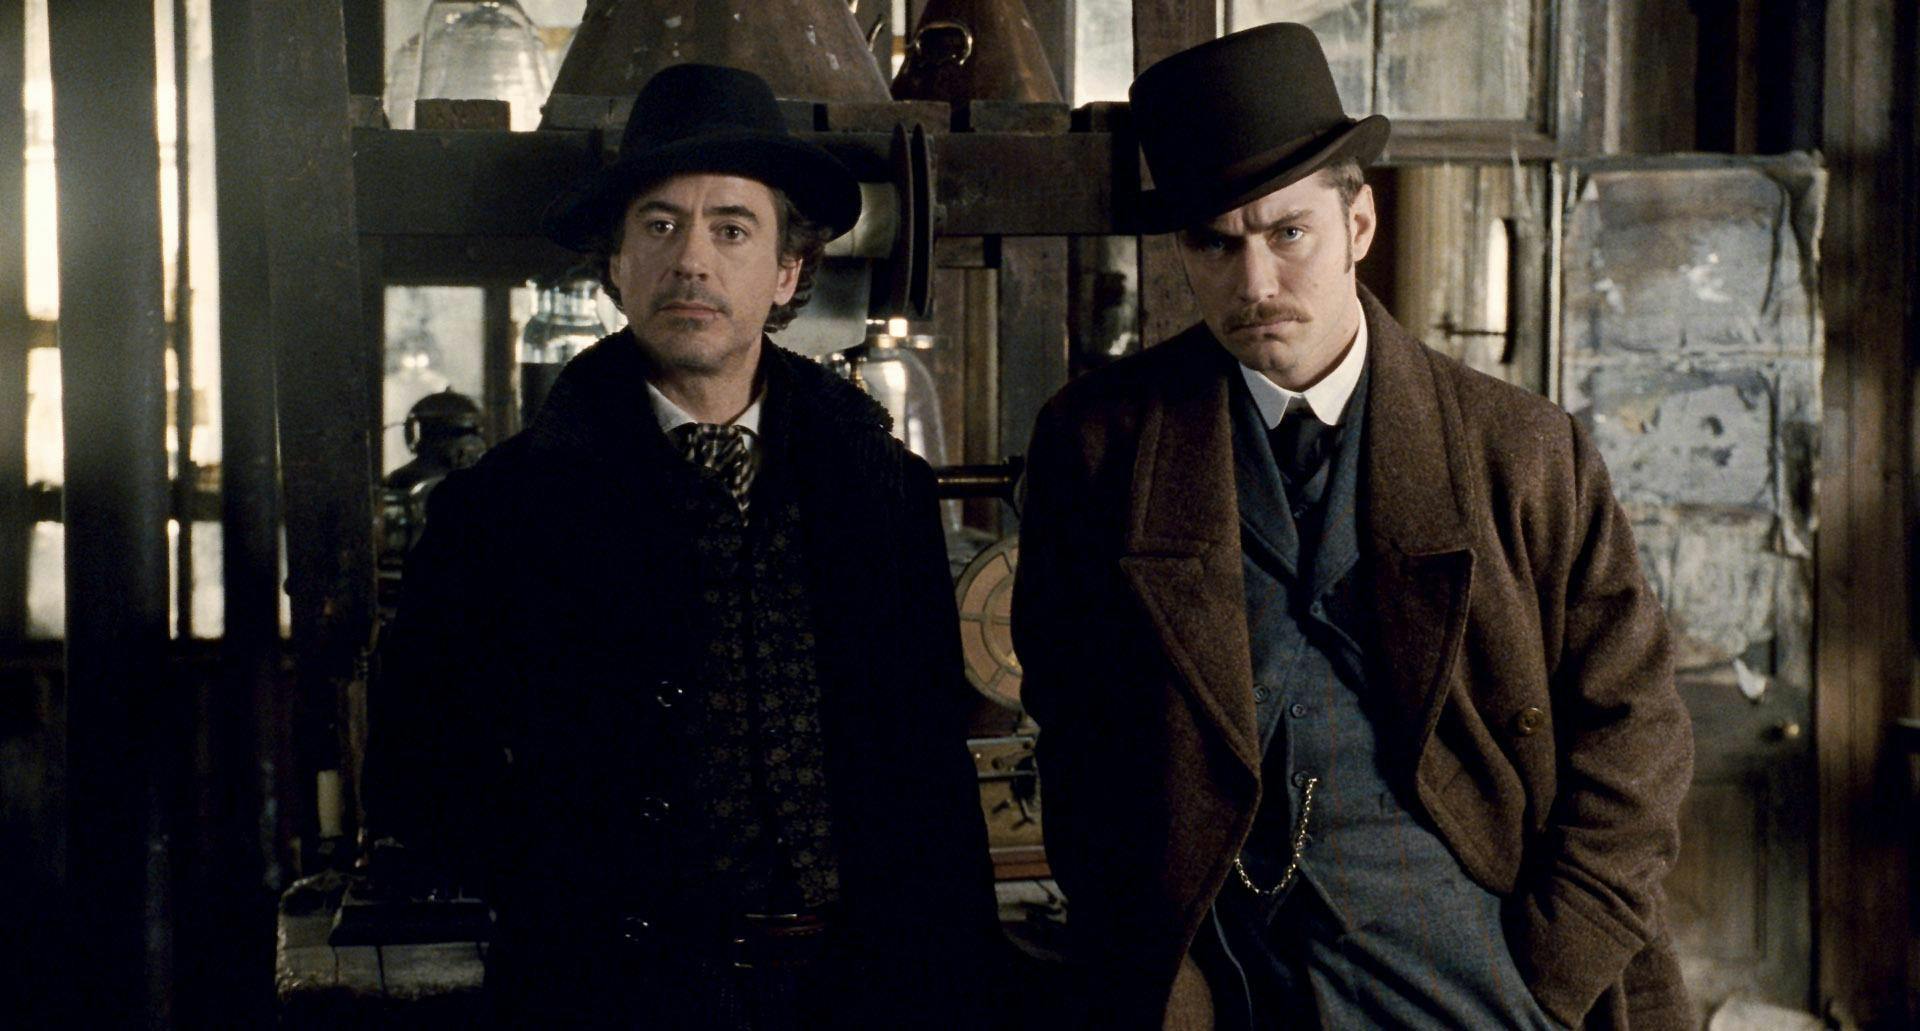 Two TV Spin-Offs From The Sherlock Holmes Movies In The Works | TV Series |  Empire